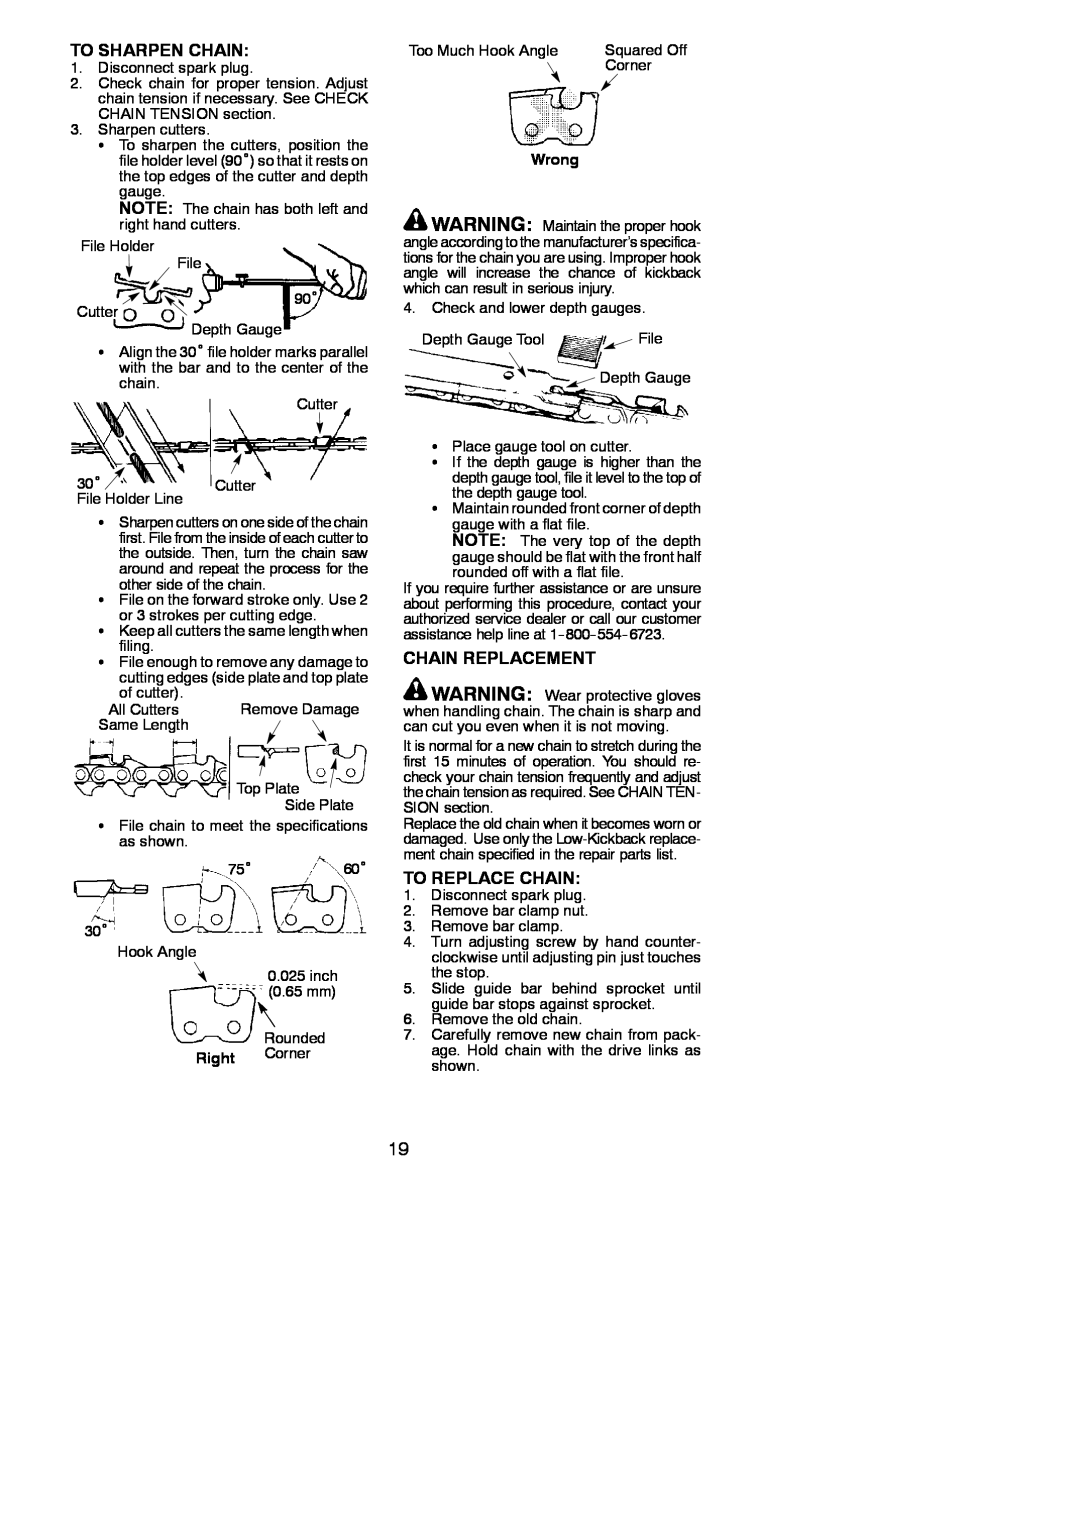 Poulan 115224926, PP338PT instruction manual To Sharpen Chain, Chain Replacement, To Replace Chain, Wrong, Right Corner 